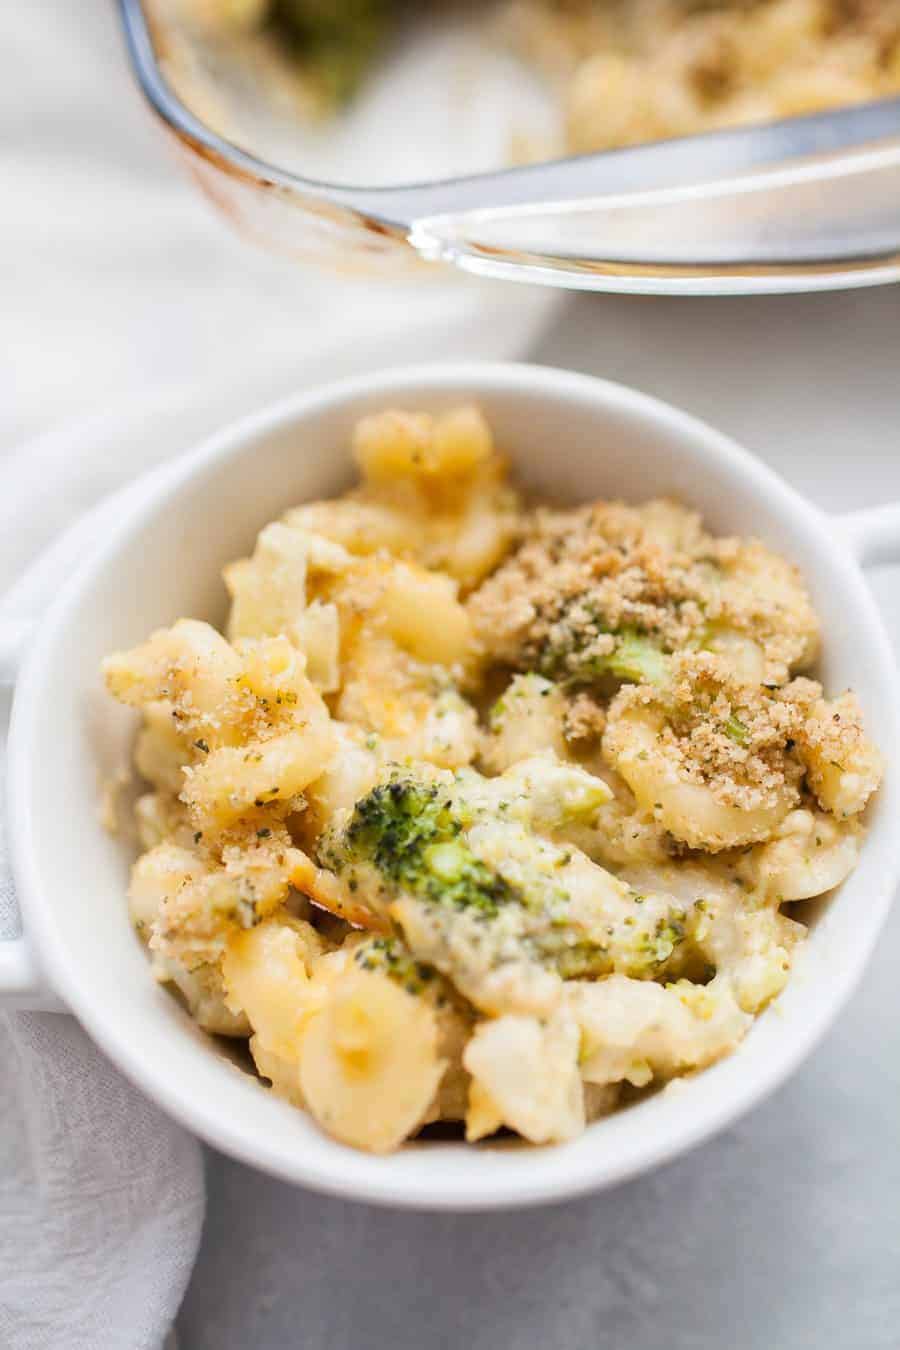 Homemade baked macaroni and cheese is a recipe every one should know how to make! If you enjoy eating mac and cheese, and who doesn't, this is a recipe you've got to try! It's perfect for weeknight dinners, bringing to a friend, or serving to the whole family! This homemade broccoli macaroni and cheese is made with corkscrew pasta, homemade cheese sauce, broccoli and finished with a bread crumb topping.?